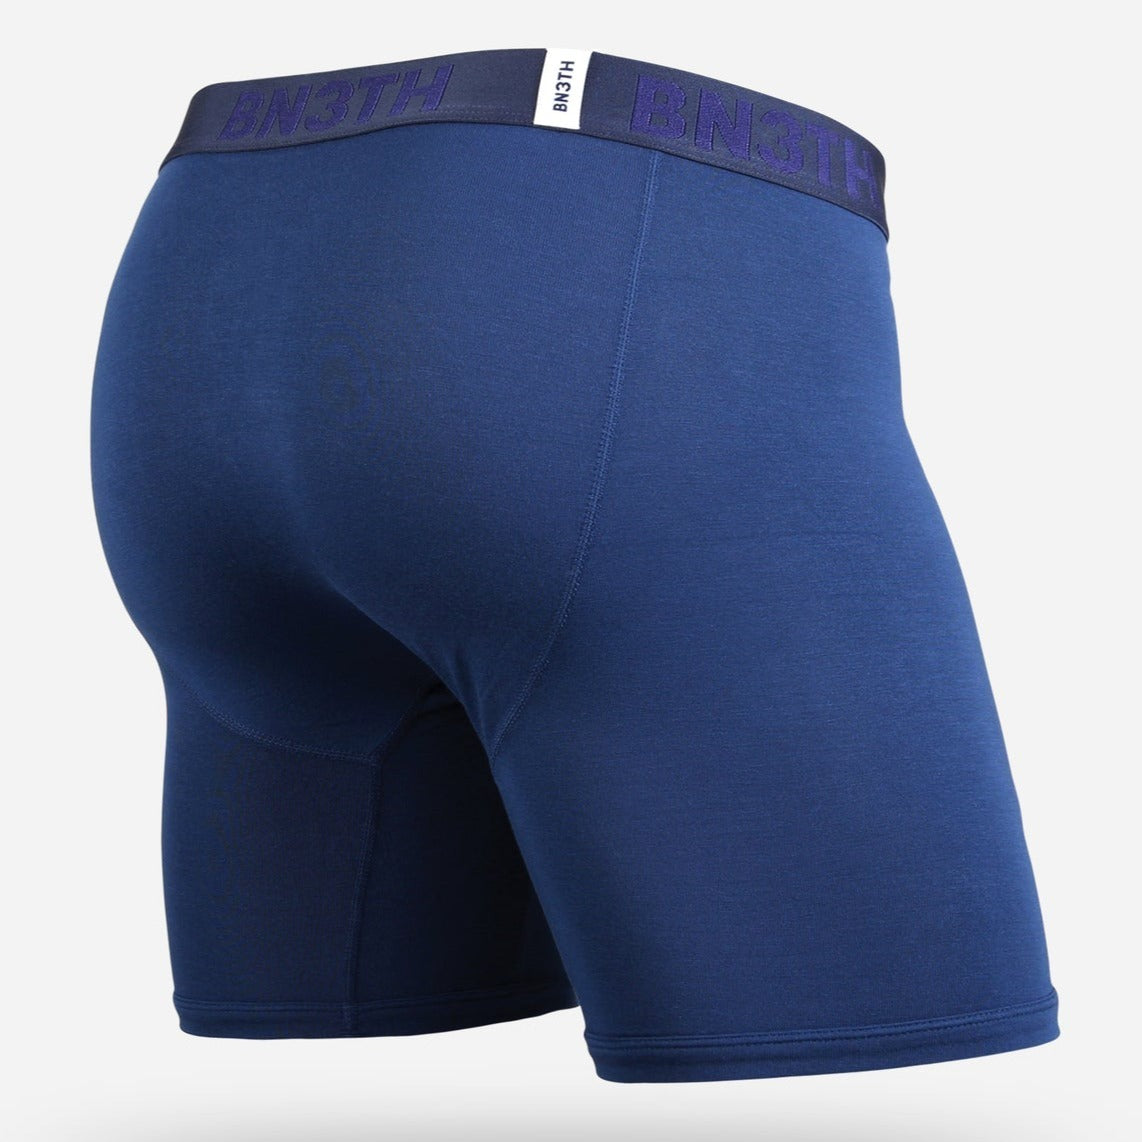 BN3TH - CLASSIC BOXER BRIEF SOLID IN NAVY